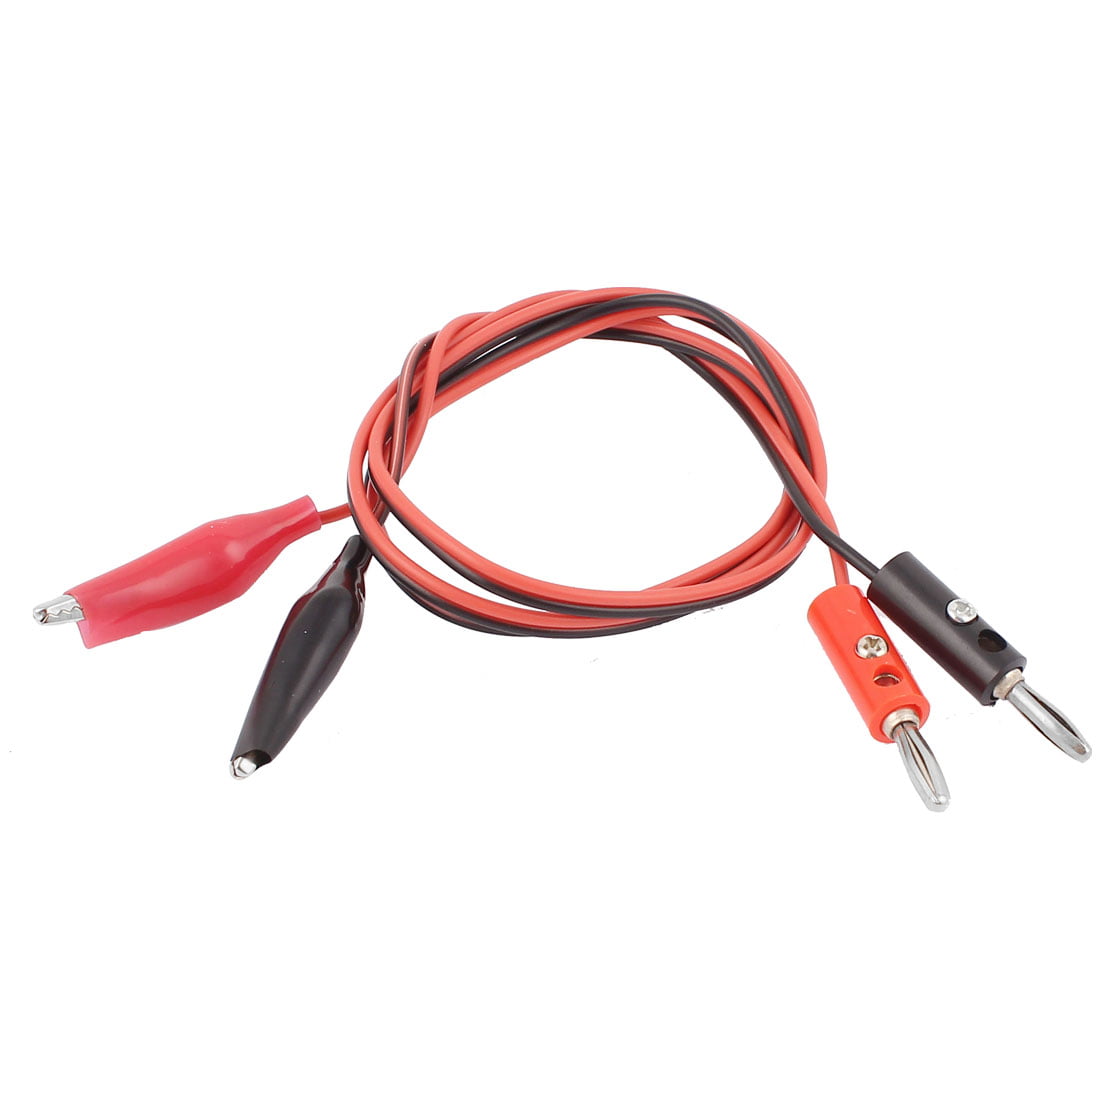 Multicolor Alligator Clip for Banana Plug Test Cable Probes Insulate Clamp `H2 